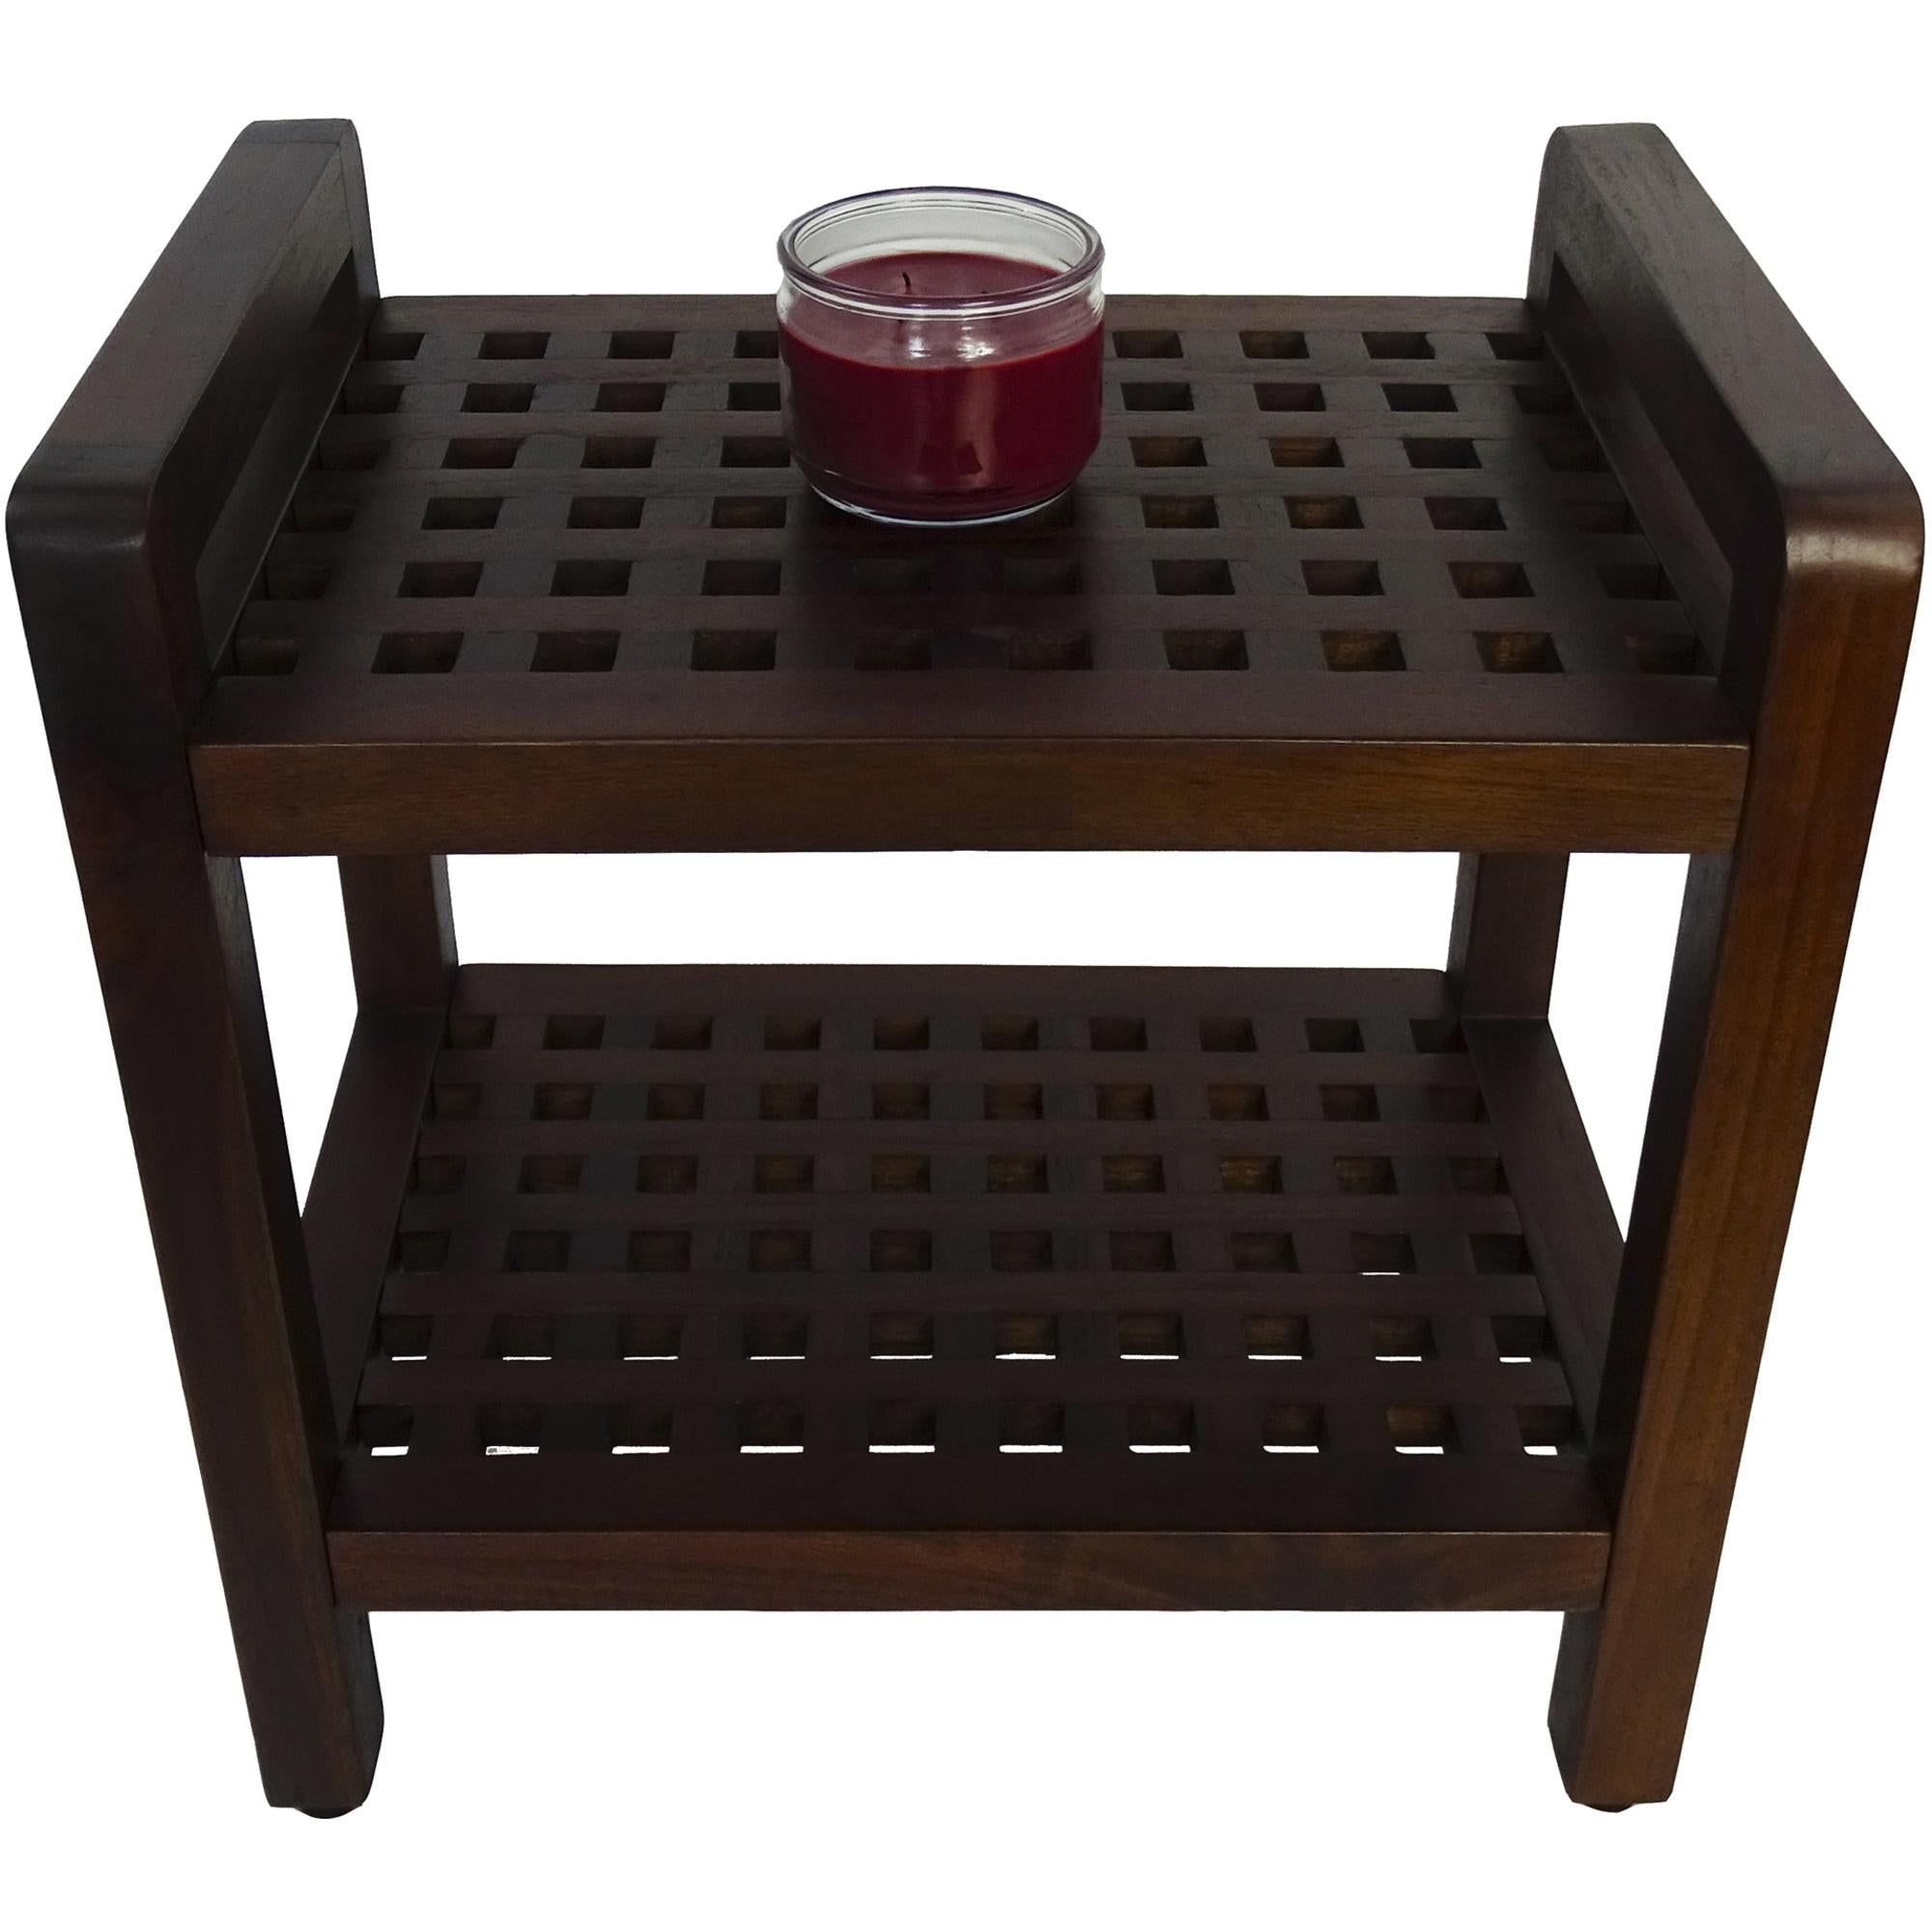 Teak Lattice Pattern Shower Stool with Shelf and Handles in Brown Finish